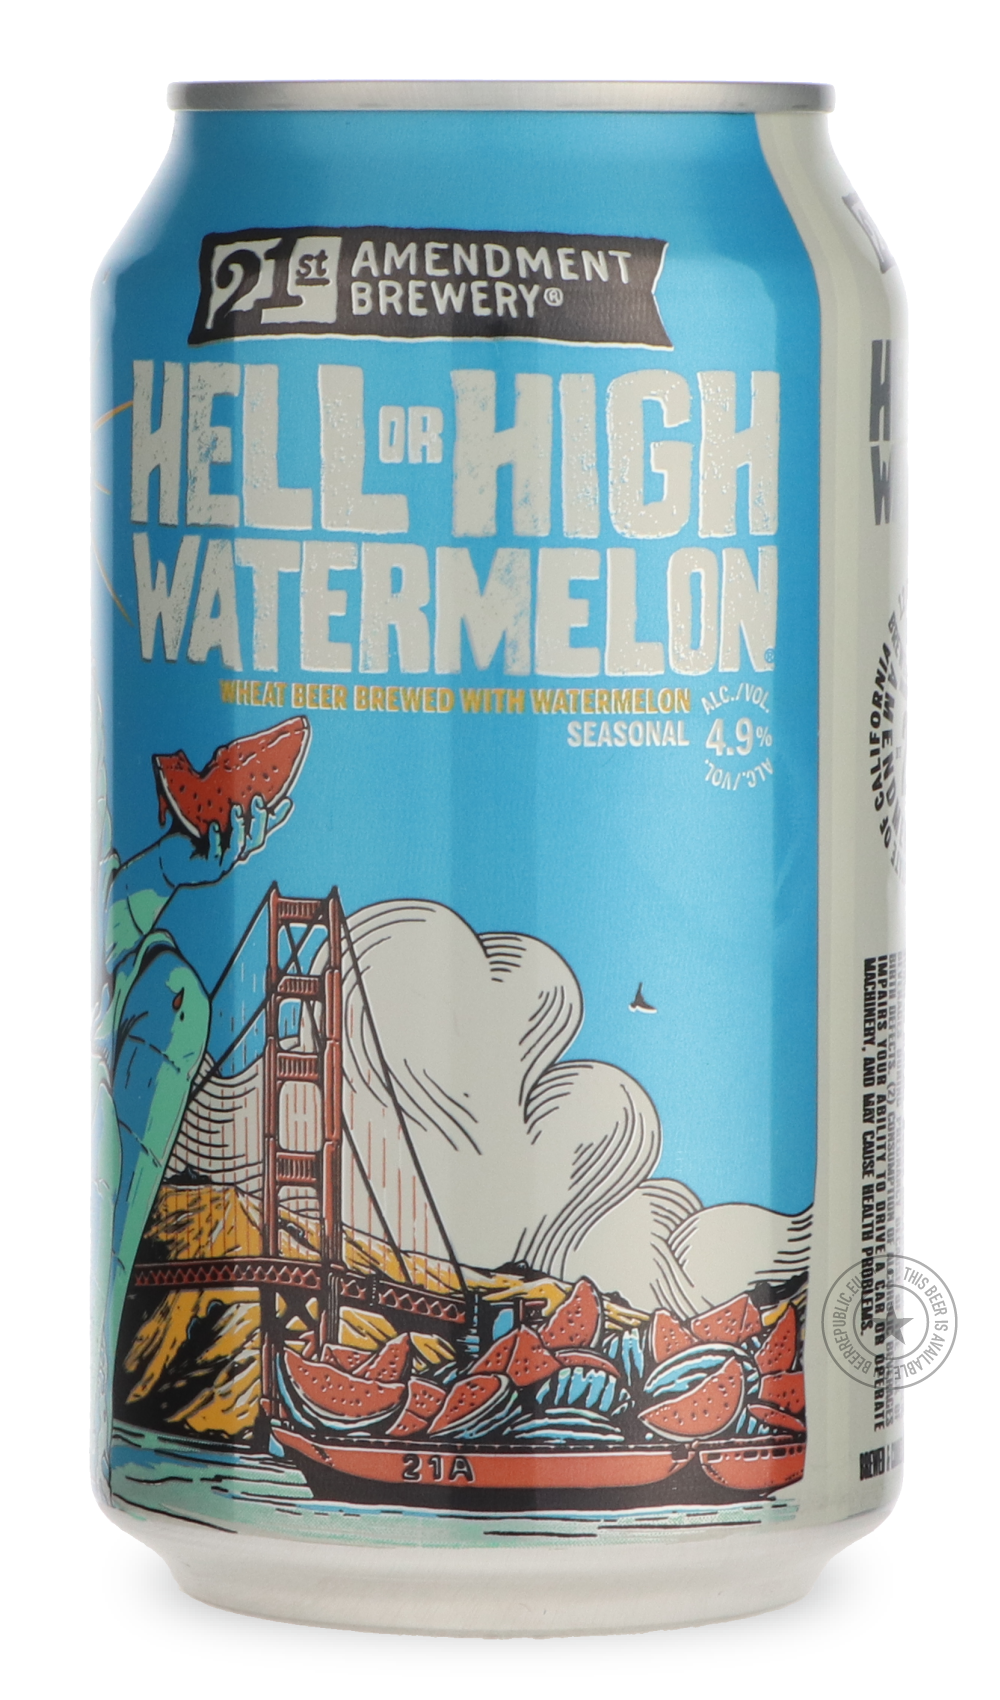 -21st Amendment- Hell or High: Watermelon-Pale- Only @ Beer Republic - The best online beer store for American & Canadian craft beer - Buy beer online from the USA and Canada - Bier online kopen - Amerikaans bier kopen - Craft beer store - Craft beer kopen - Amerikanisch bier kaufen - Bier online kaufen - Acheter biere online - IPA - Stout - Porter - New England IPA - Hazy IPA - Imperial Stout - Barrel Aged - Barrel Aged Imperial Stout - Brown - Dark beer - Blond - Blonde - Pilsner - Lager - Wheat - Weizen 